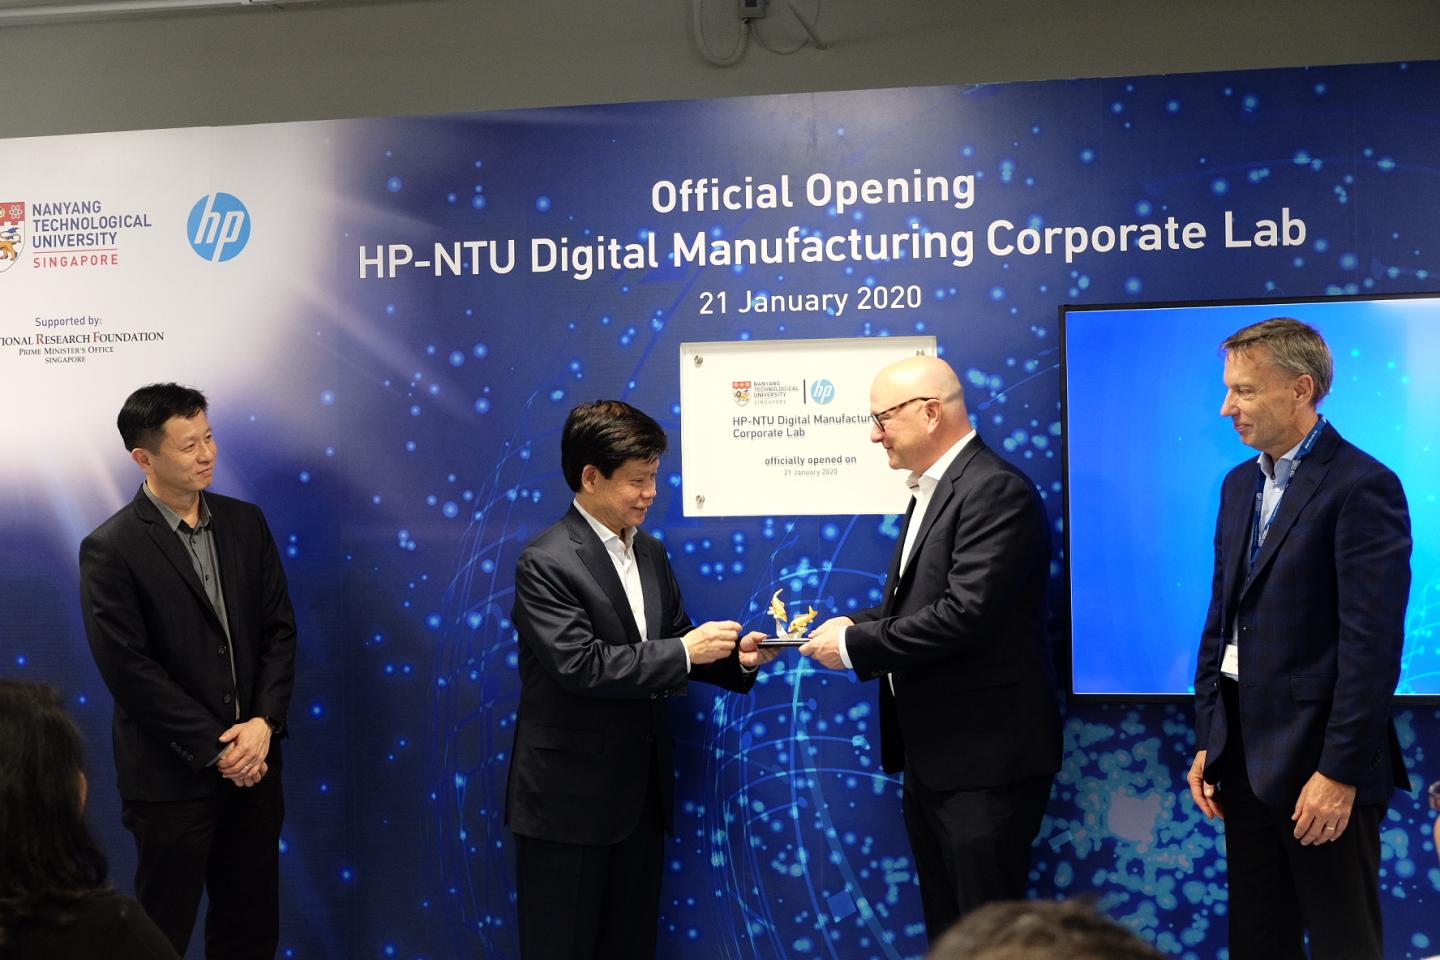 The HP-NTU Digital Manufacturing Corporate Lab was officially opened today